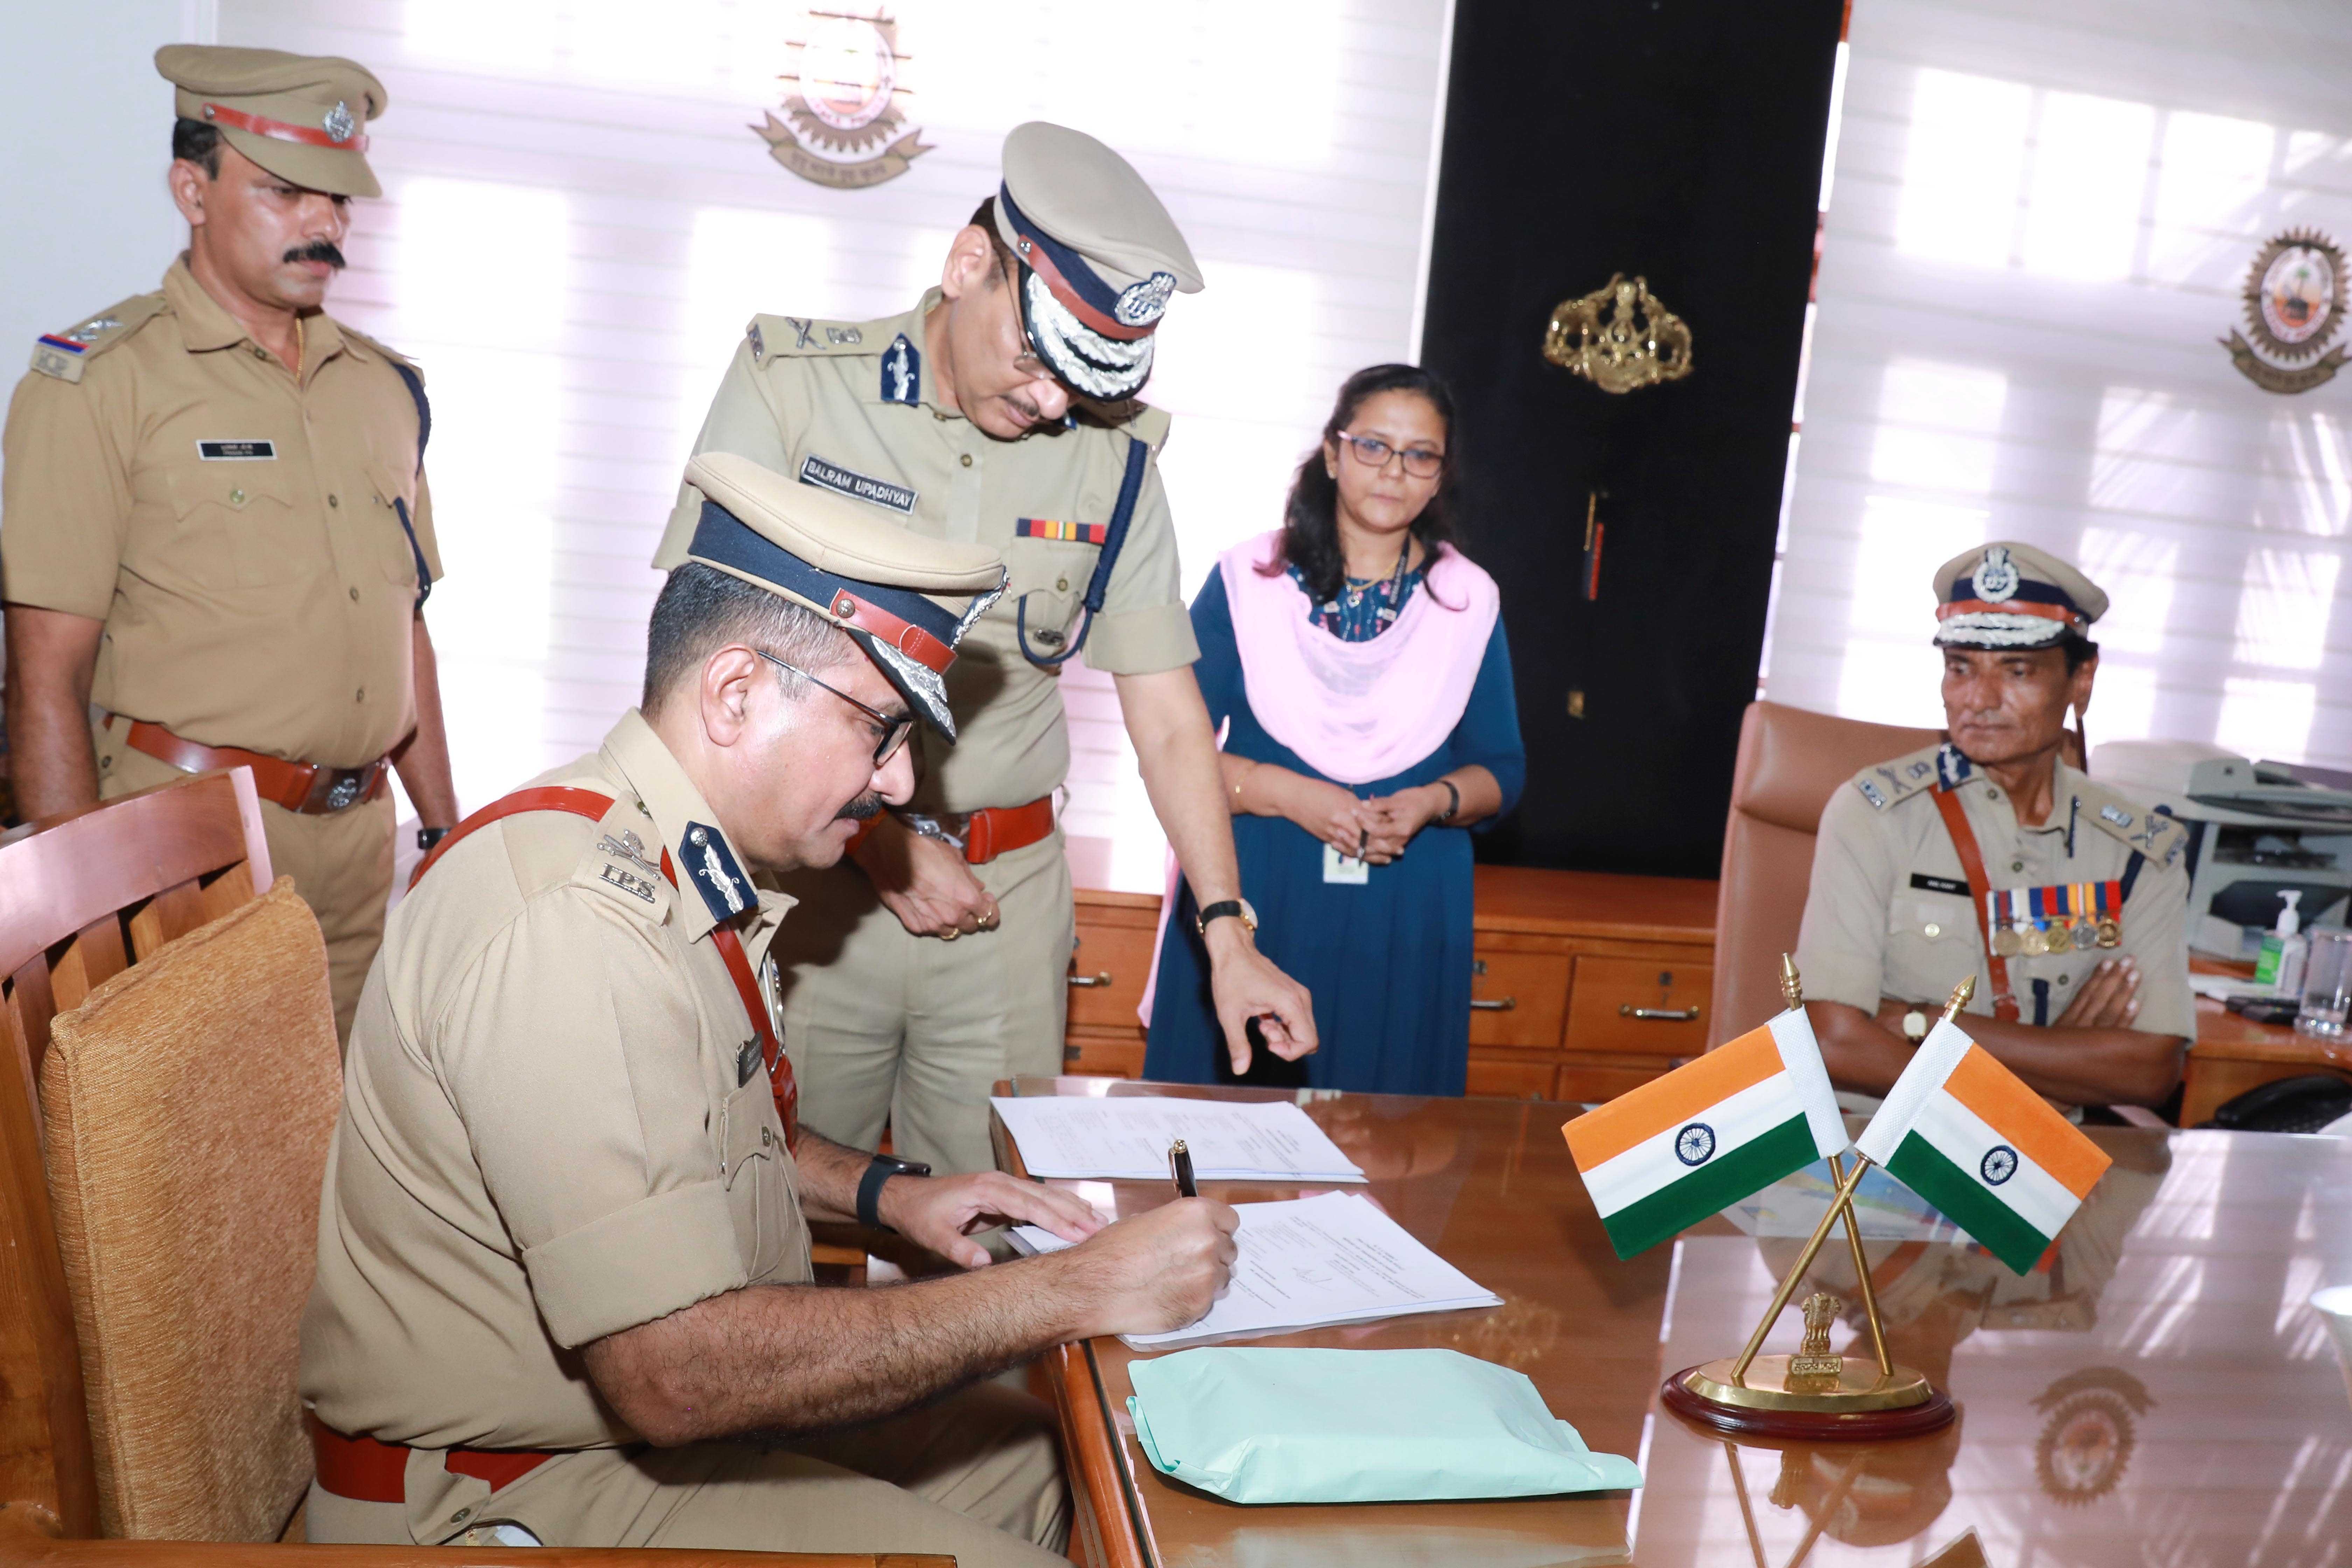 Dr. Shaik Darvesh Saheb IPS, has assumed the role of the new State Police Chief of Kerala, succeeding Shri. Anil Kant IPS.